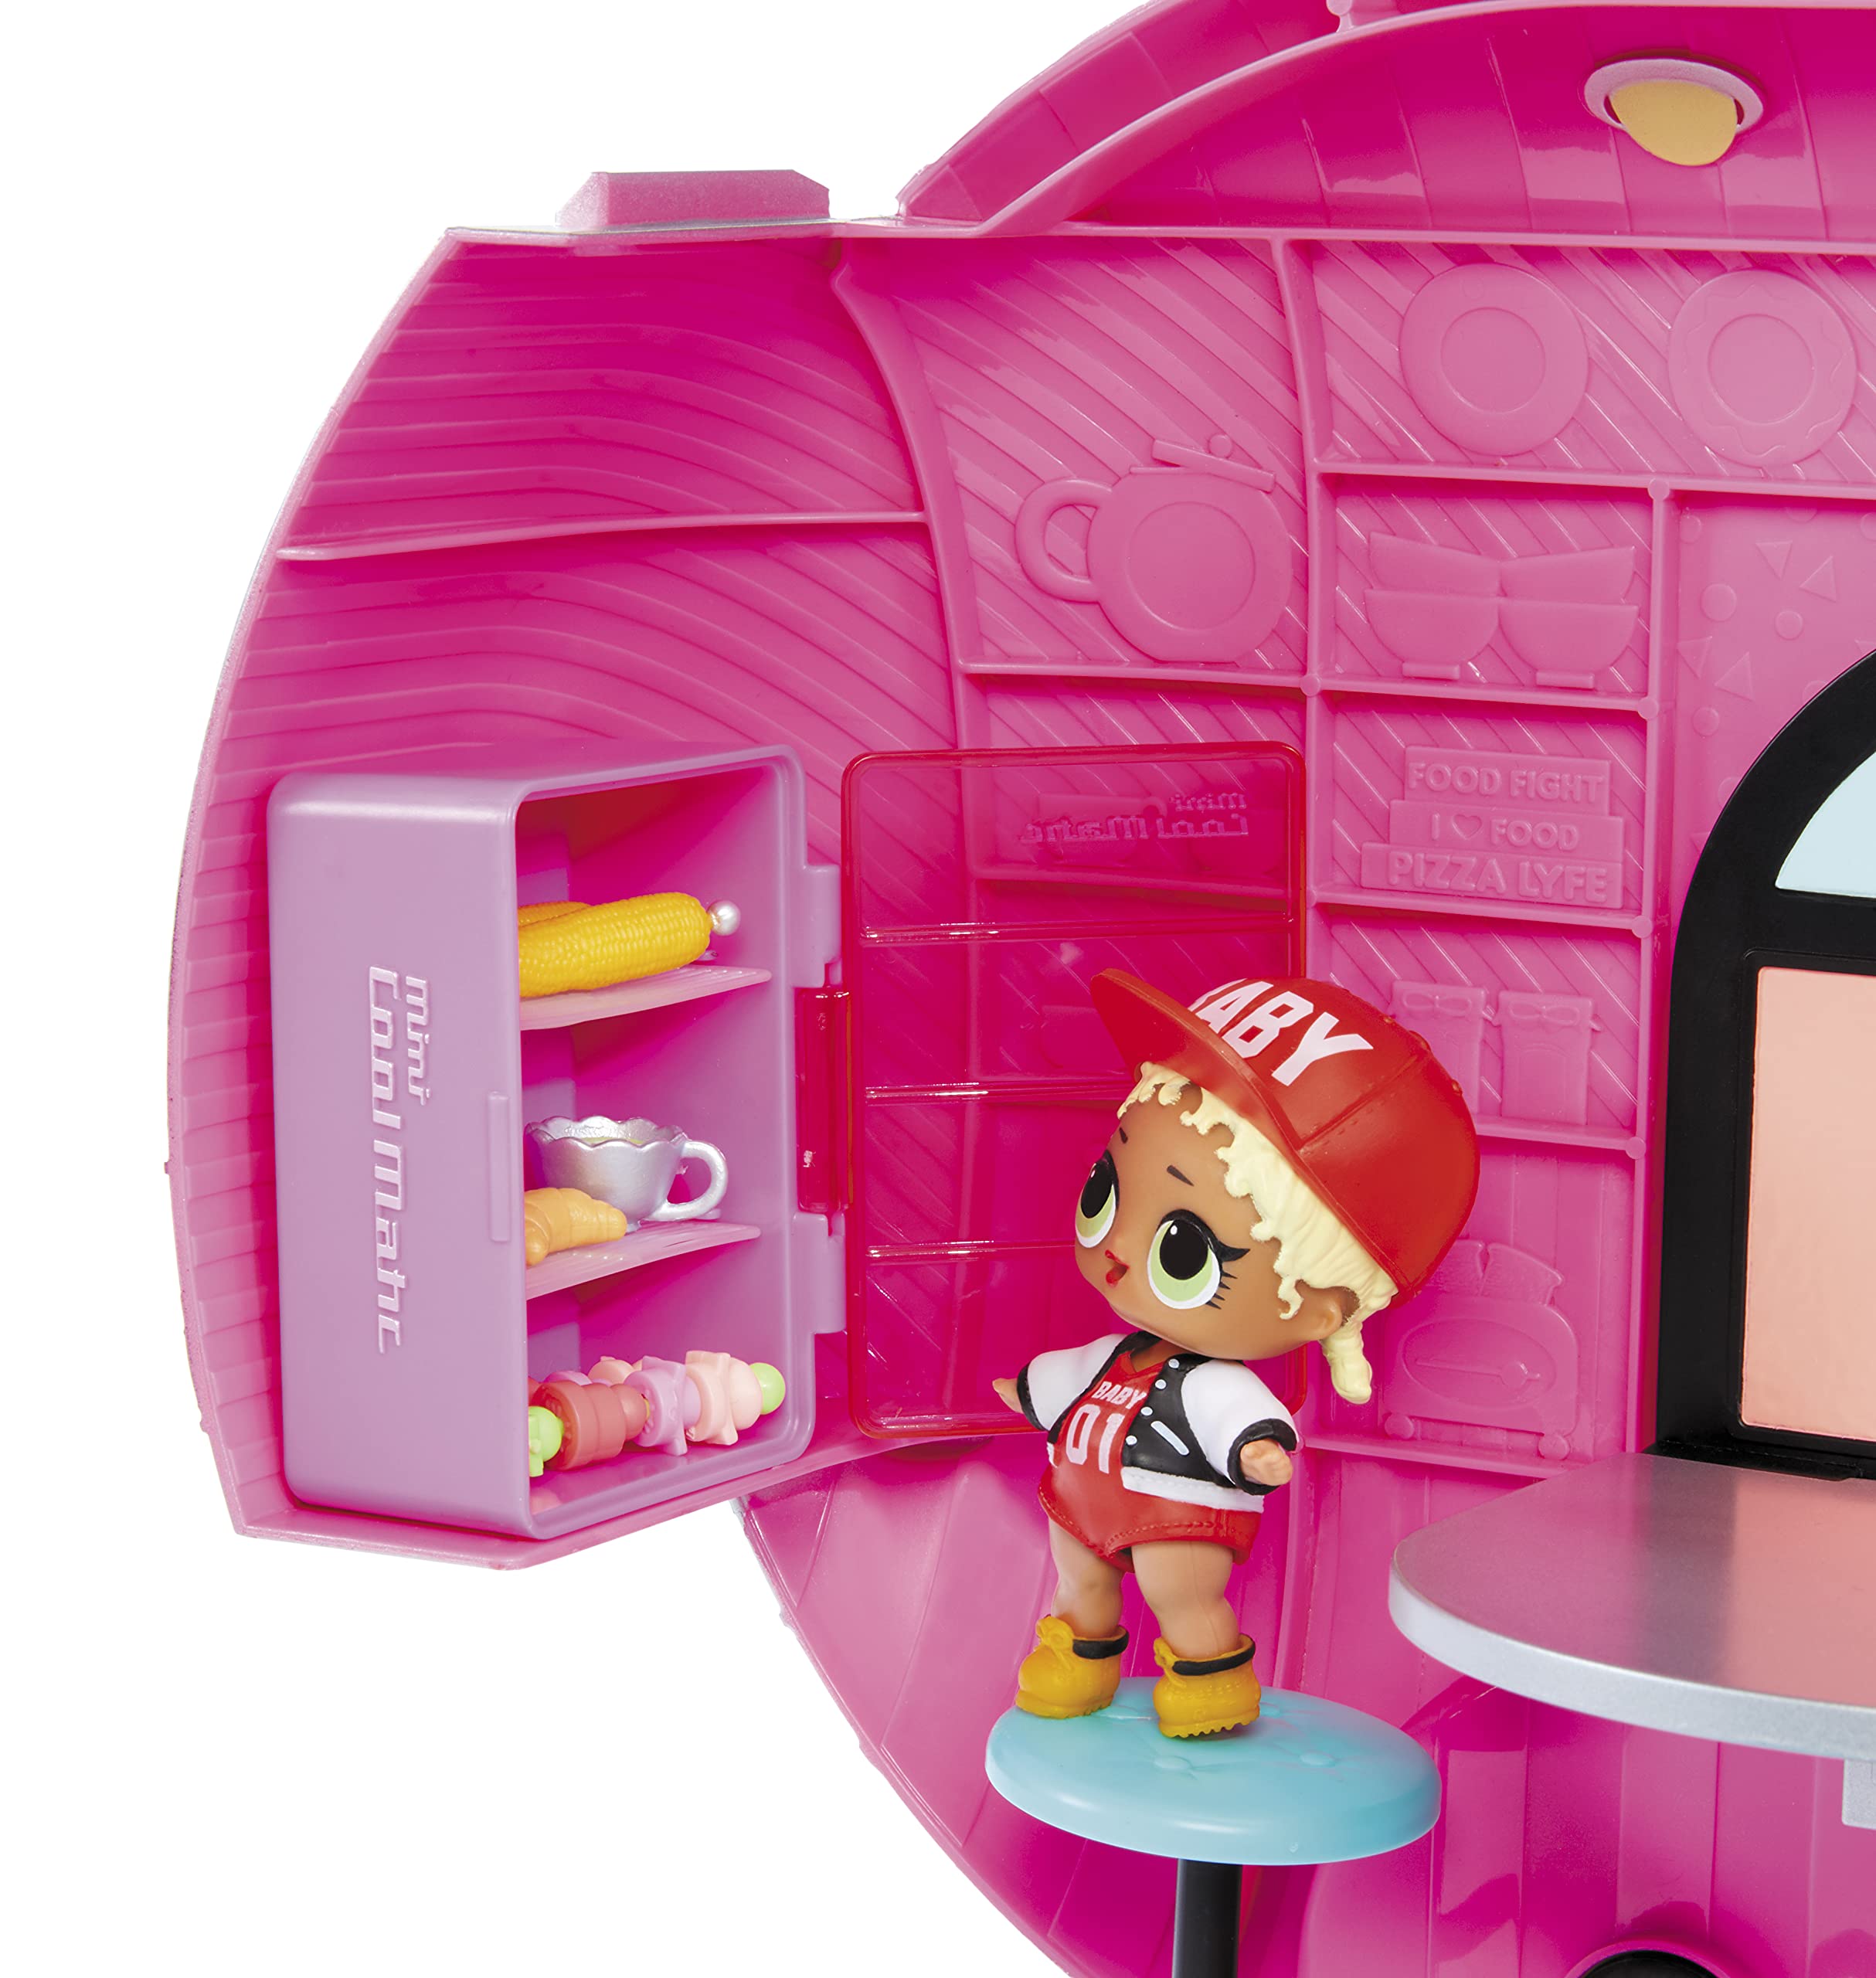 LOL Surprise OMG Glamper Fashion Camper Doll Playset with 55+ Surprises, Fully-Furnished with Light Up Pool, Water Slide, Bunk Beds, Cafe, BBQ Grill, DJ Booth - Gift Toy for Girls Ages 4 5 6 7+ Years